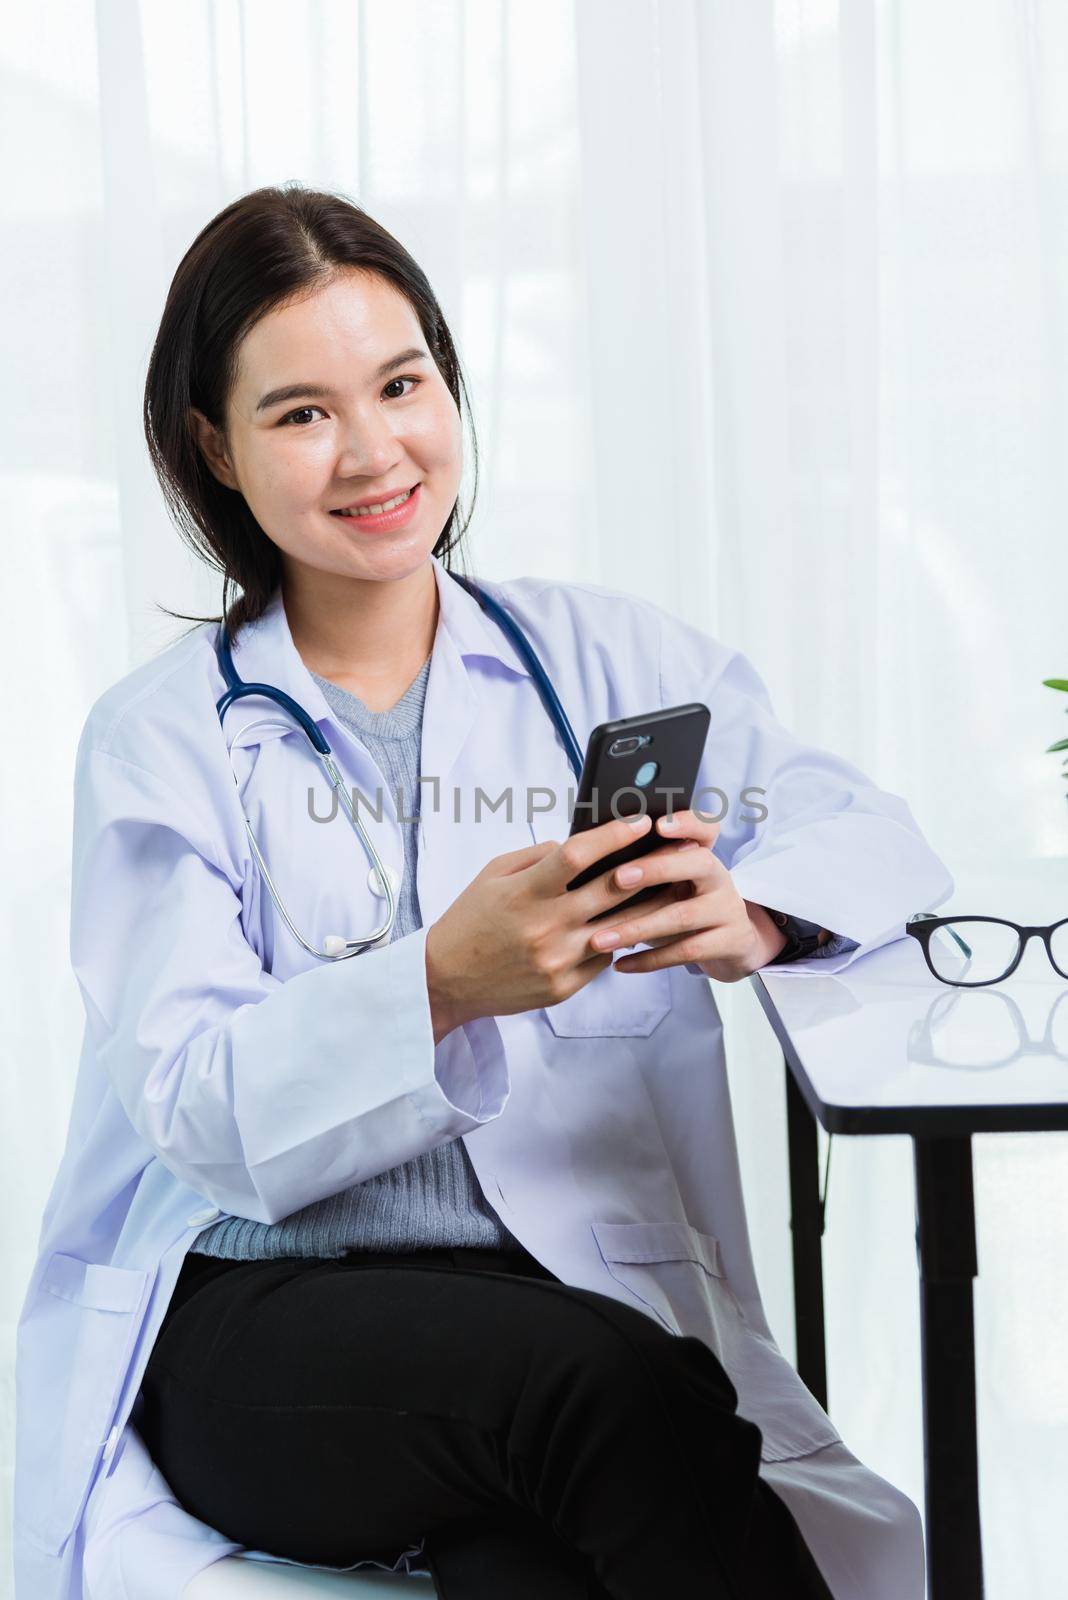 Asian doctor young beautiful woman smiling using working or holding with smart mobile phone and laptop computer at hospital desk office, technology healthcare medical concept